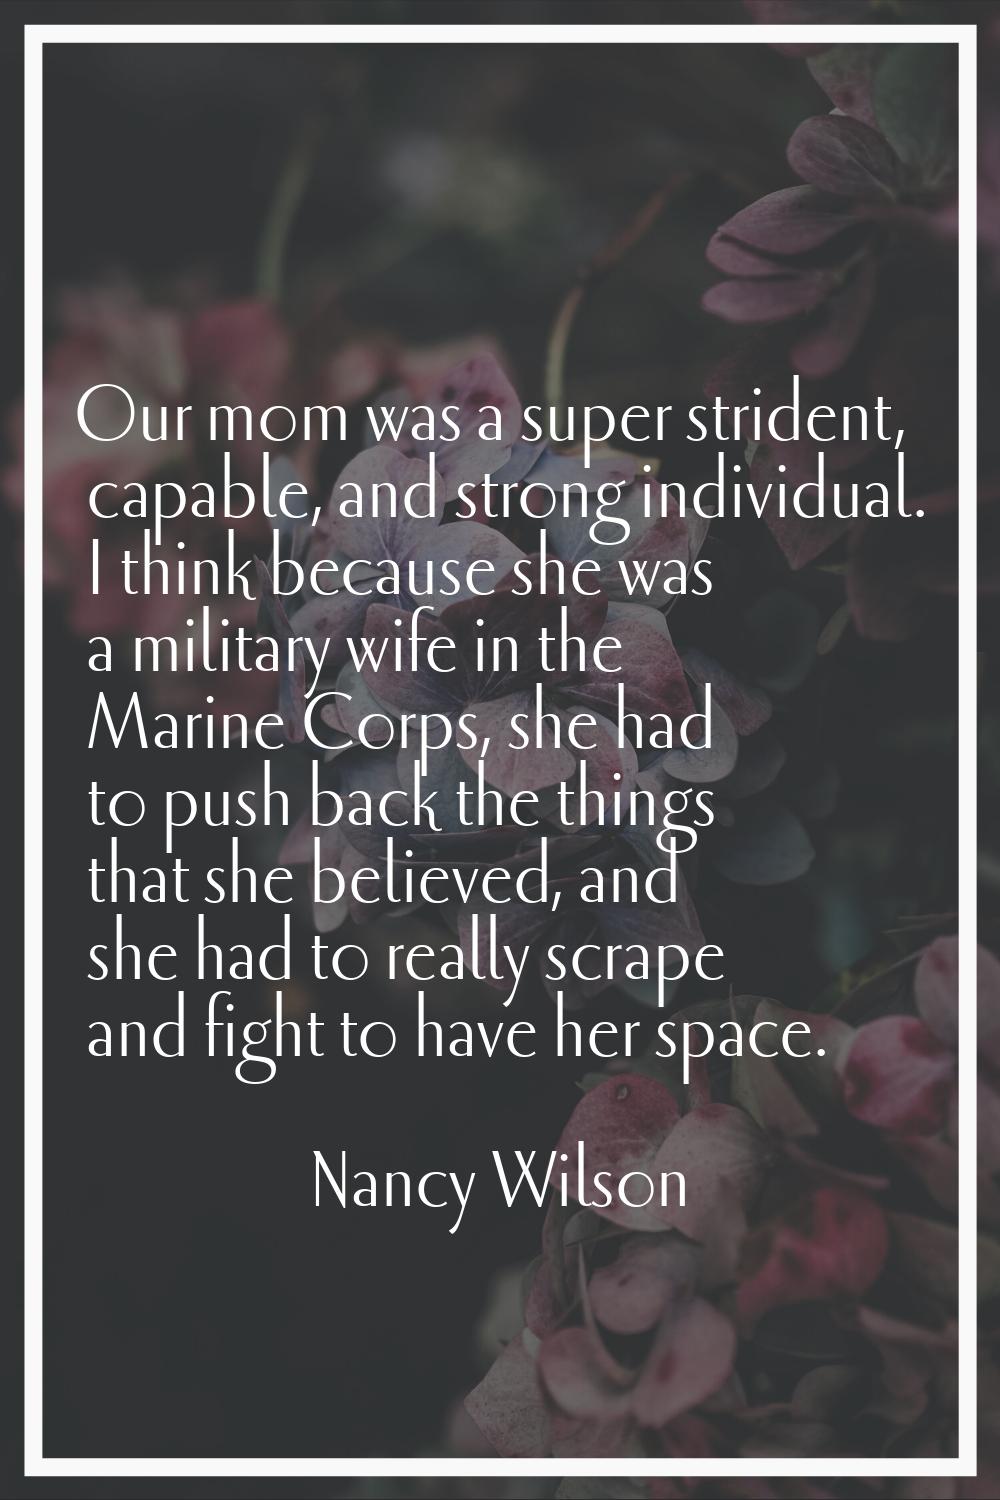 Our mom was a super strident, capable, and strong individual. I think because she was a military wi